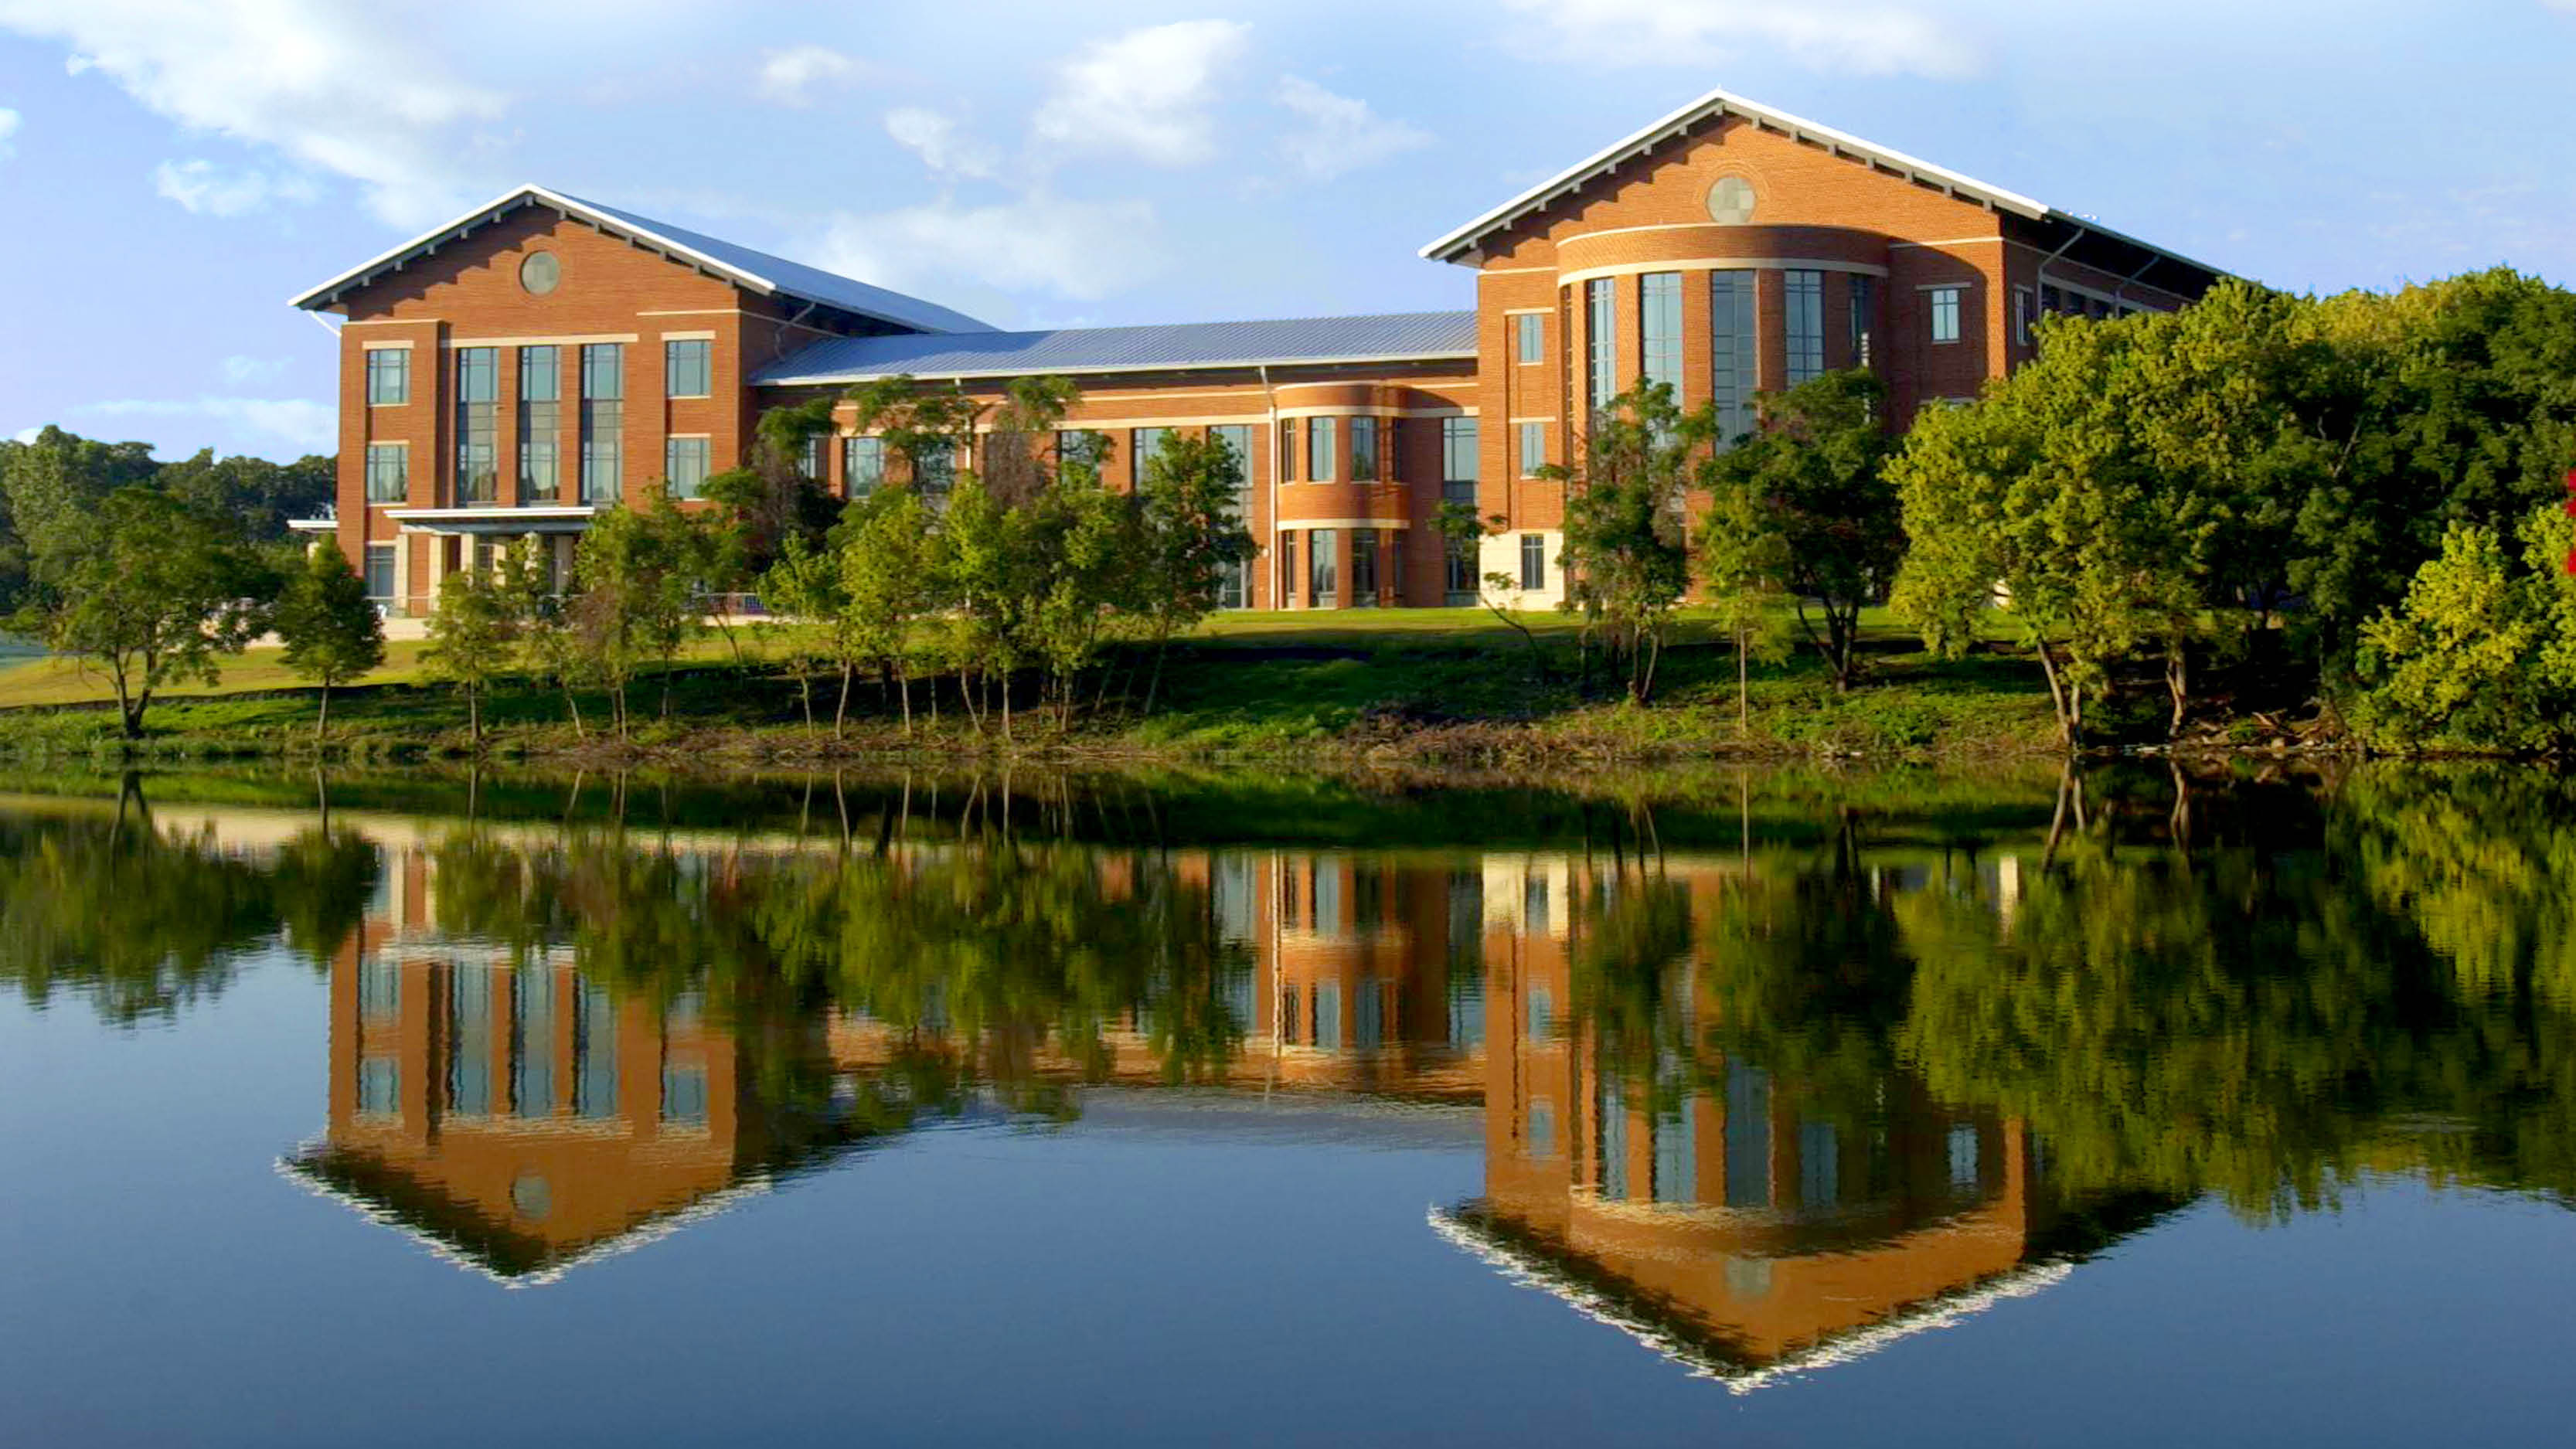 Photo of the Rear of the Umphrey Law Center with the Brazos River in the foreground